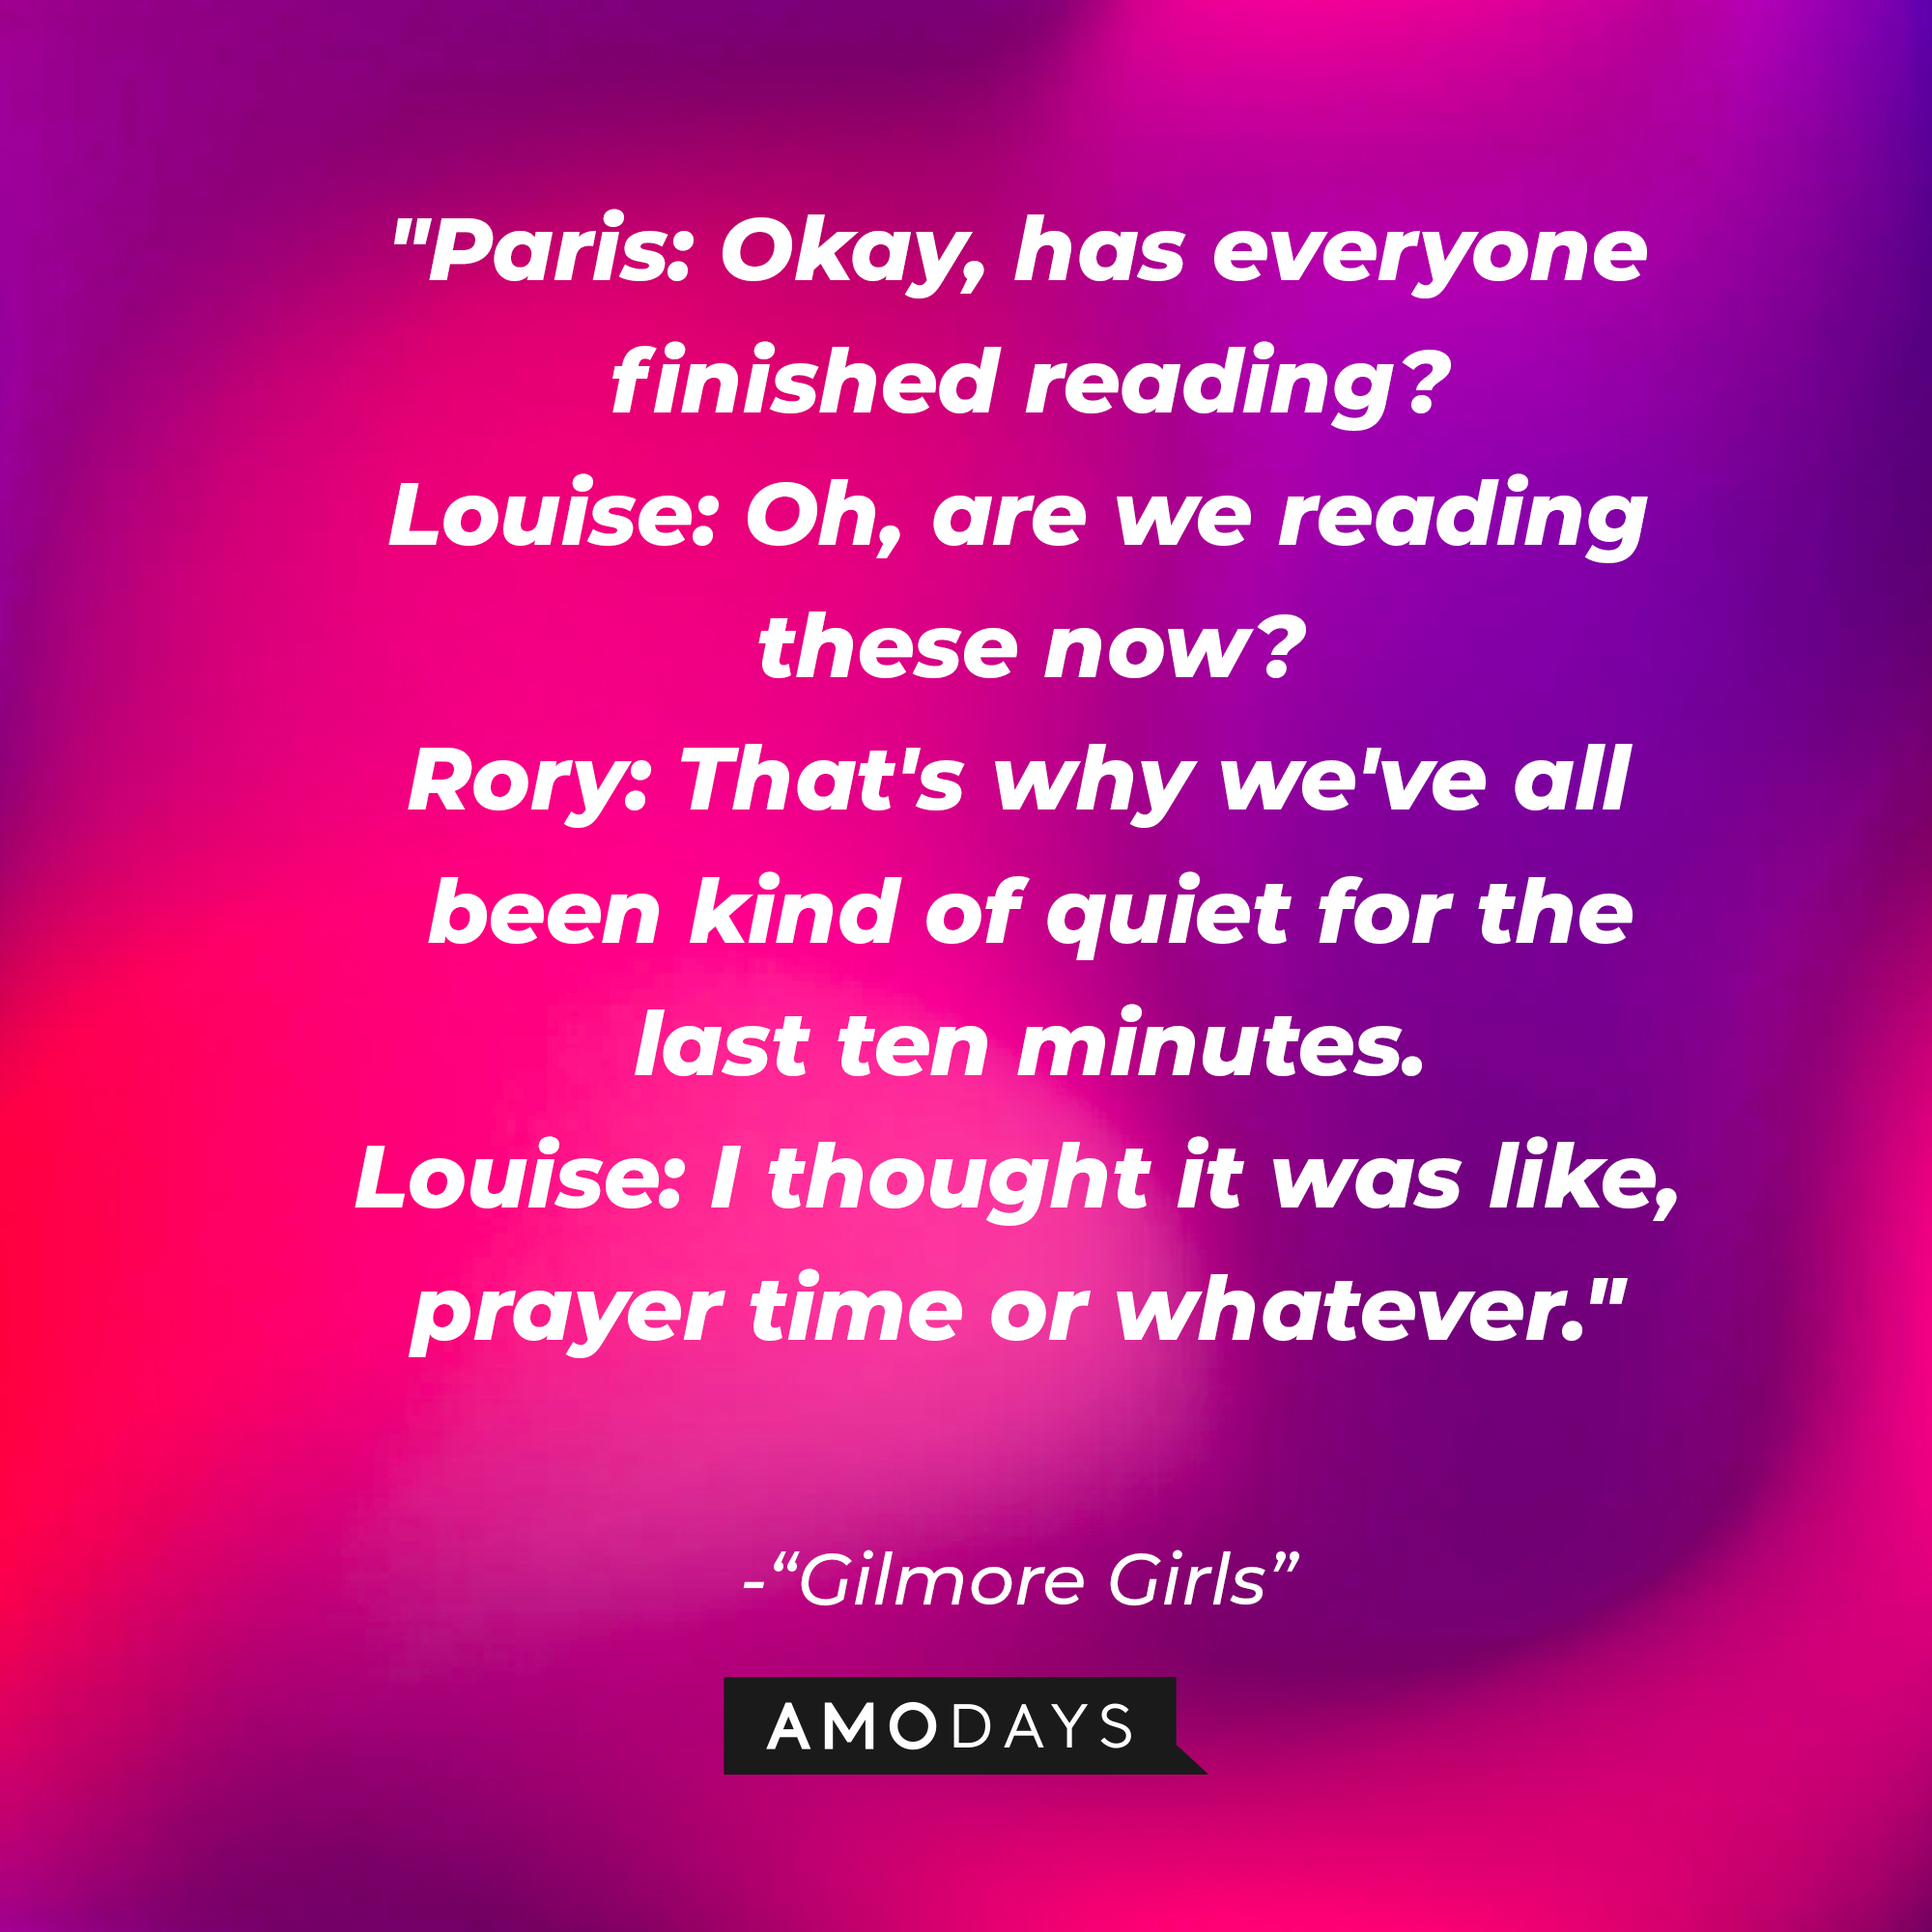 Quote from "Gilmore Girls": “Paris: Okay, has everyone finished reading? Louise: Oh, are we reading these now? Rory: That's why we've all been kind of quiet for the last ten minutes. Louise: I thought it was like, prayer time or whatever.” | Source: AmoDays